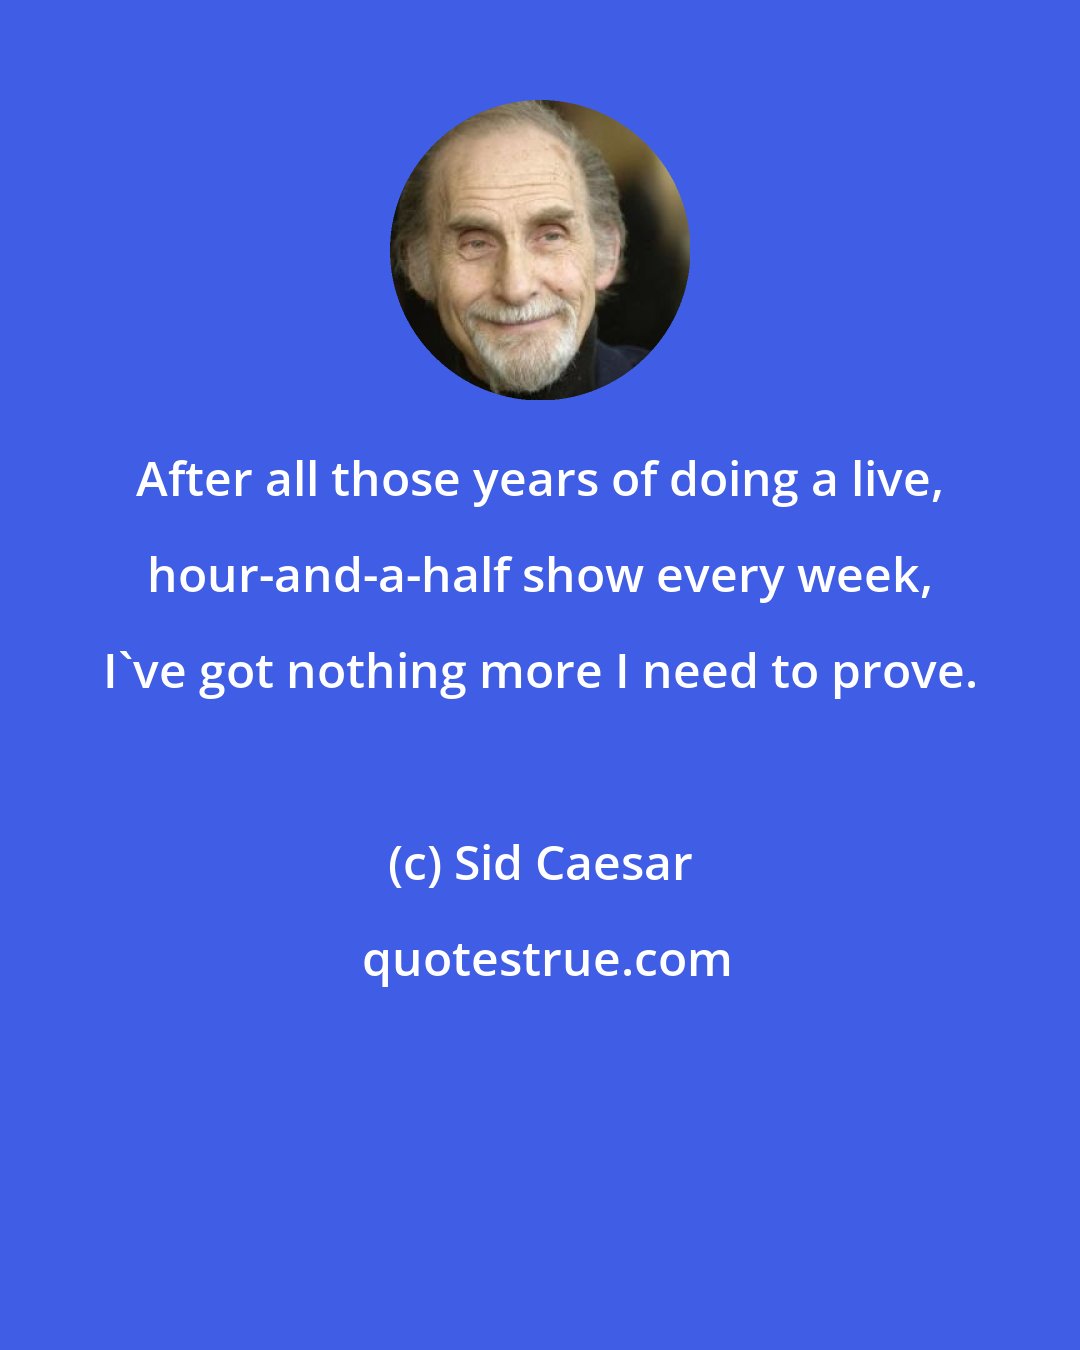 Sid Caesar: After all those years of doing a live, hour-and-a-half show every week, I've got nothing more I need to prove.